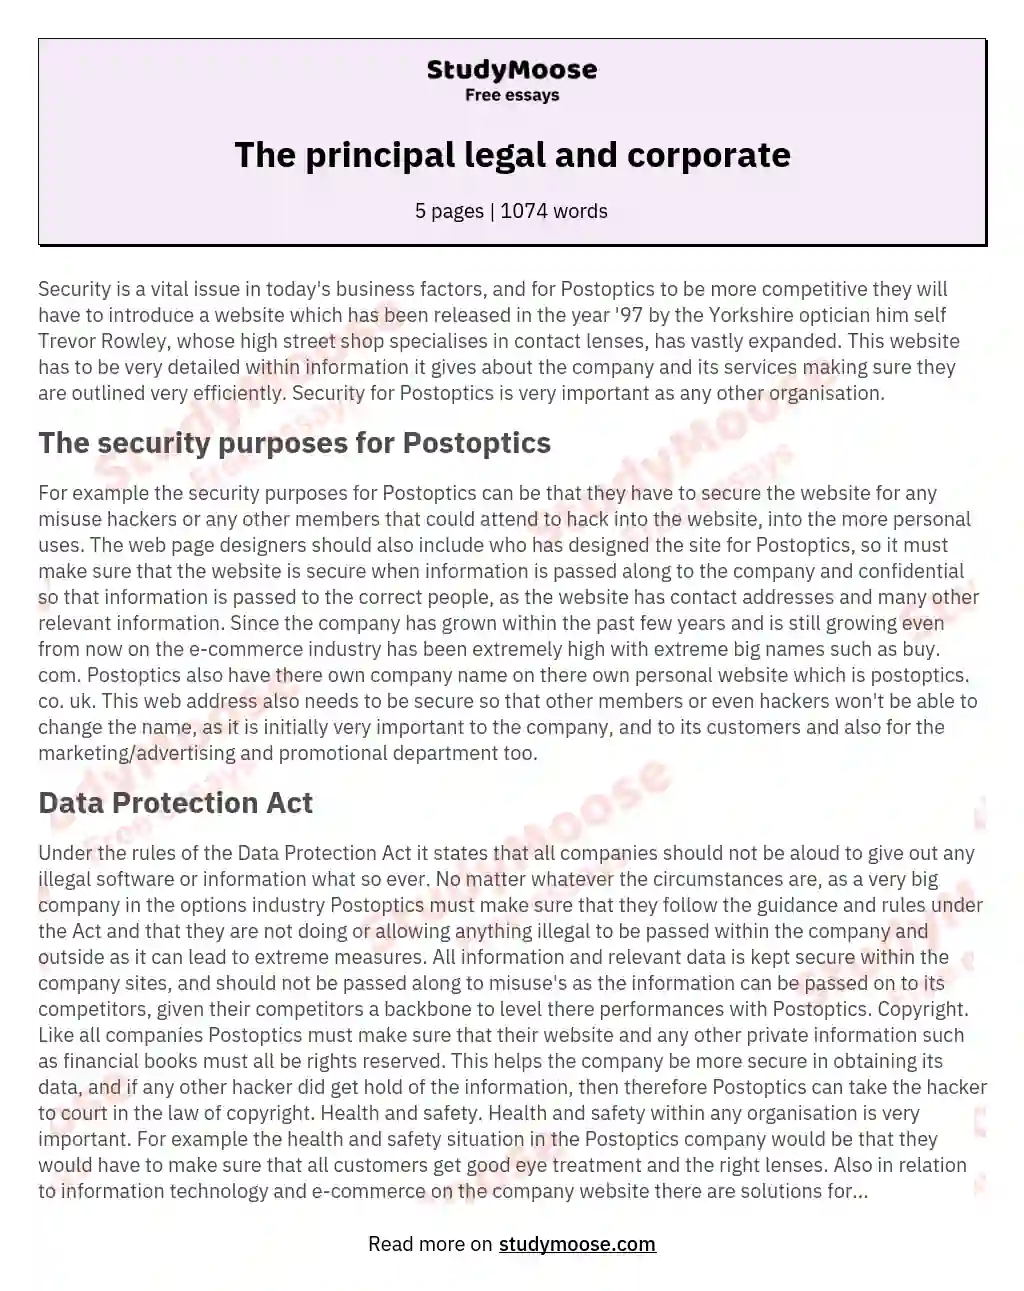 The principal legal and corporate essay